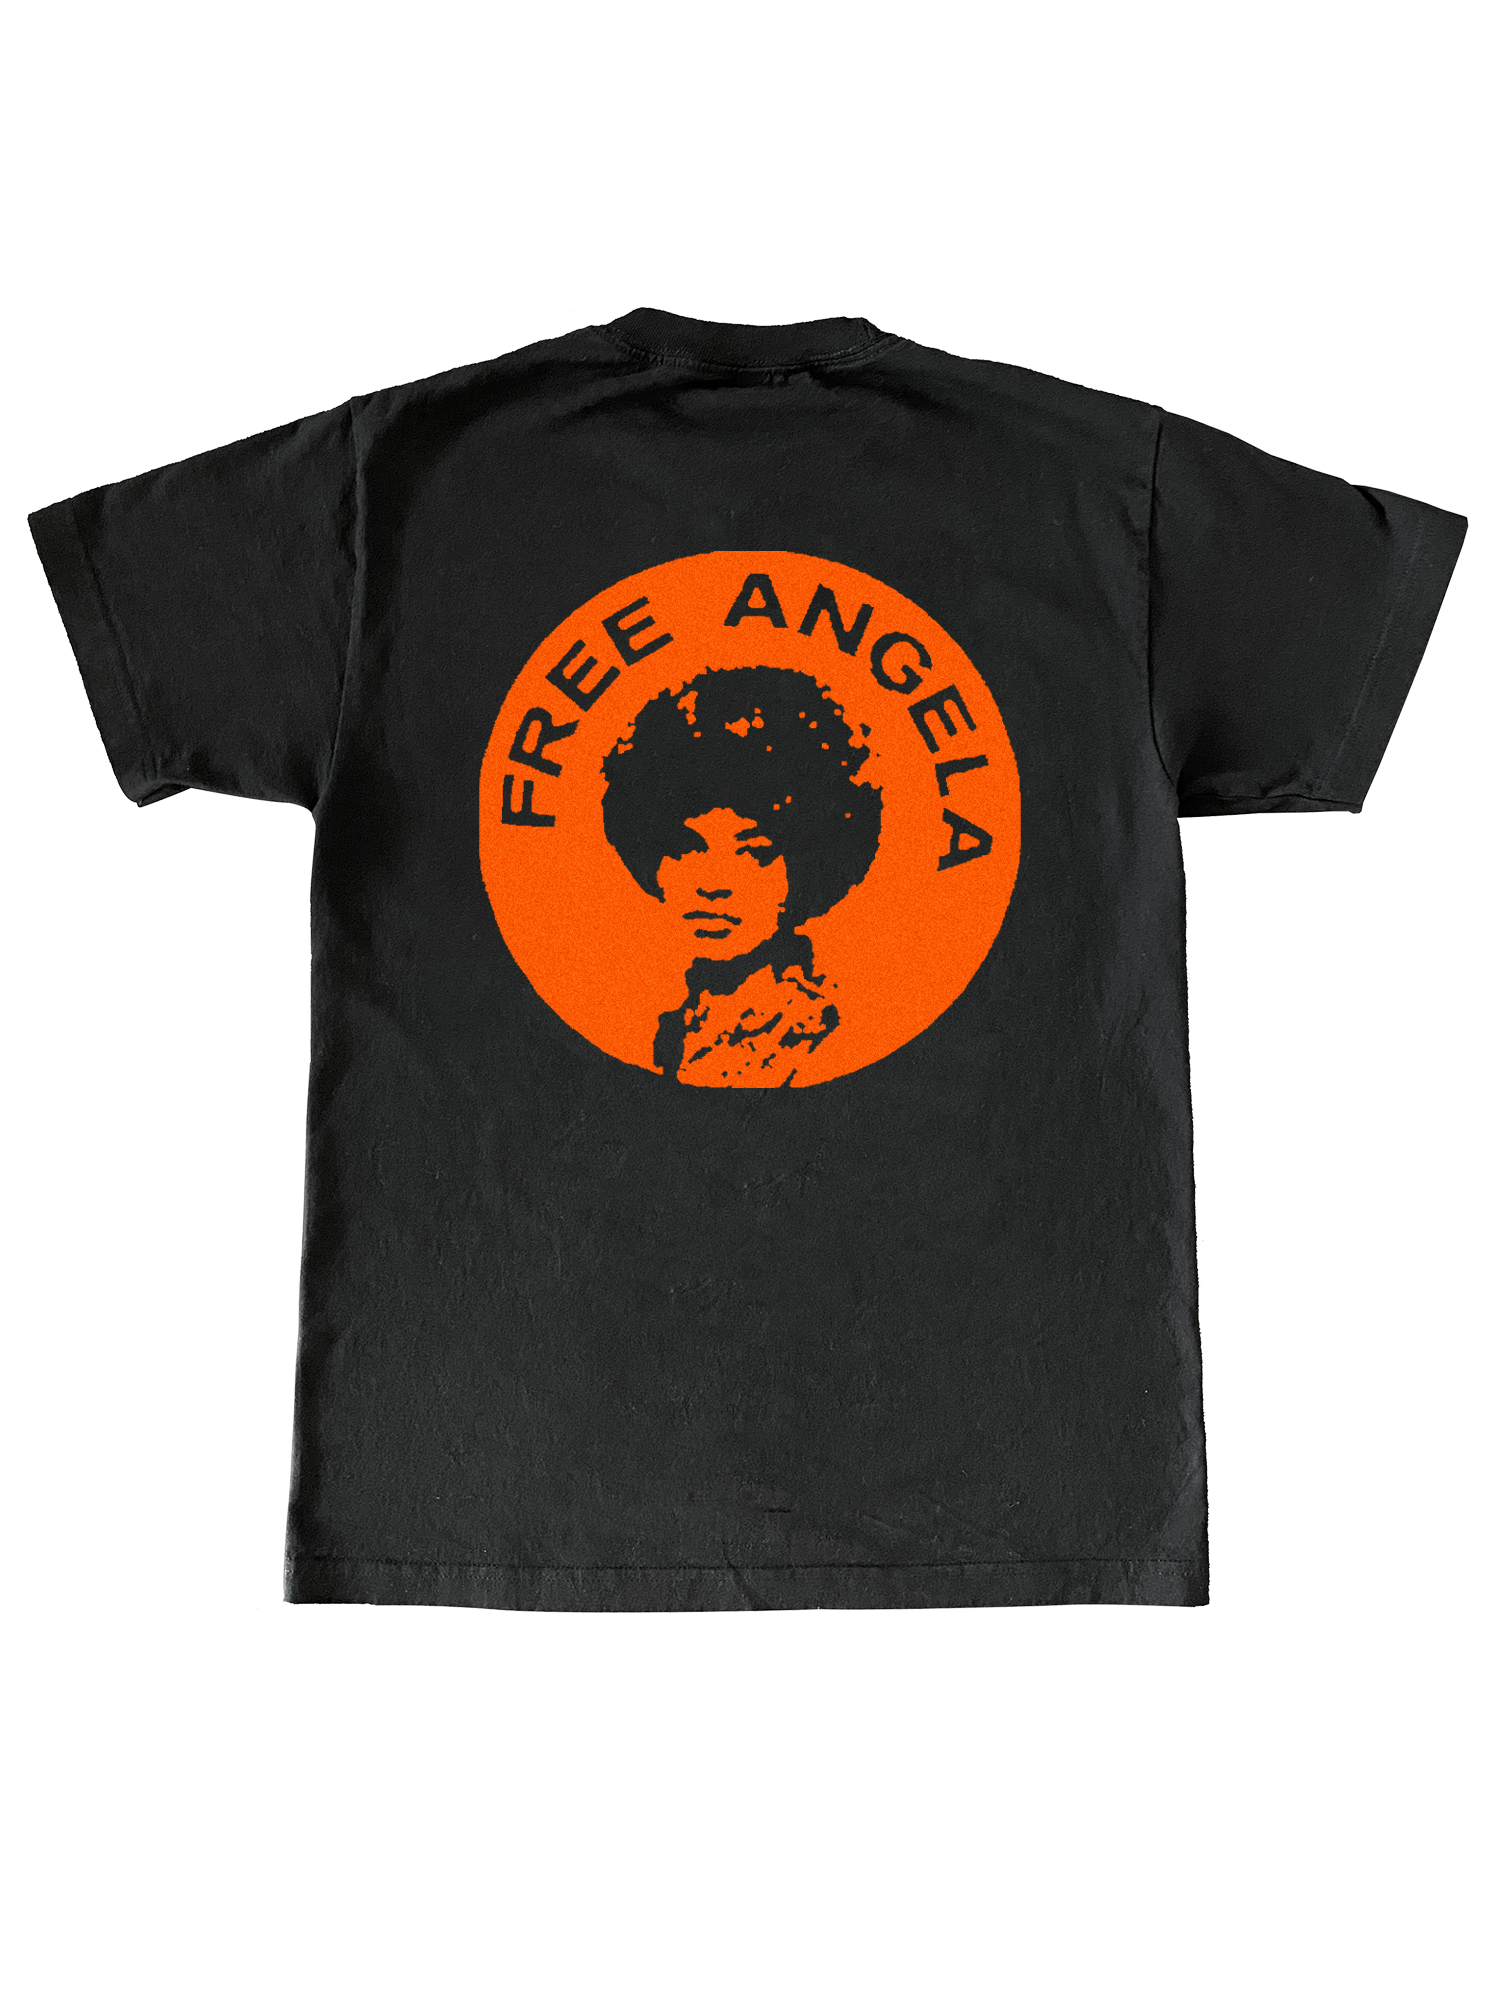 Free Angela Recycled Cotton Tee